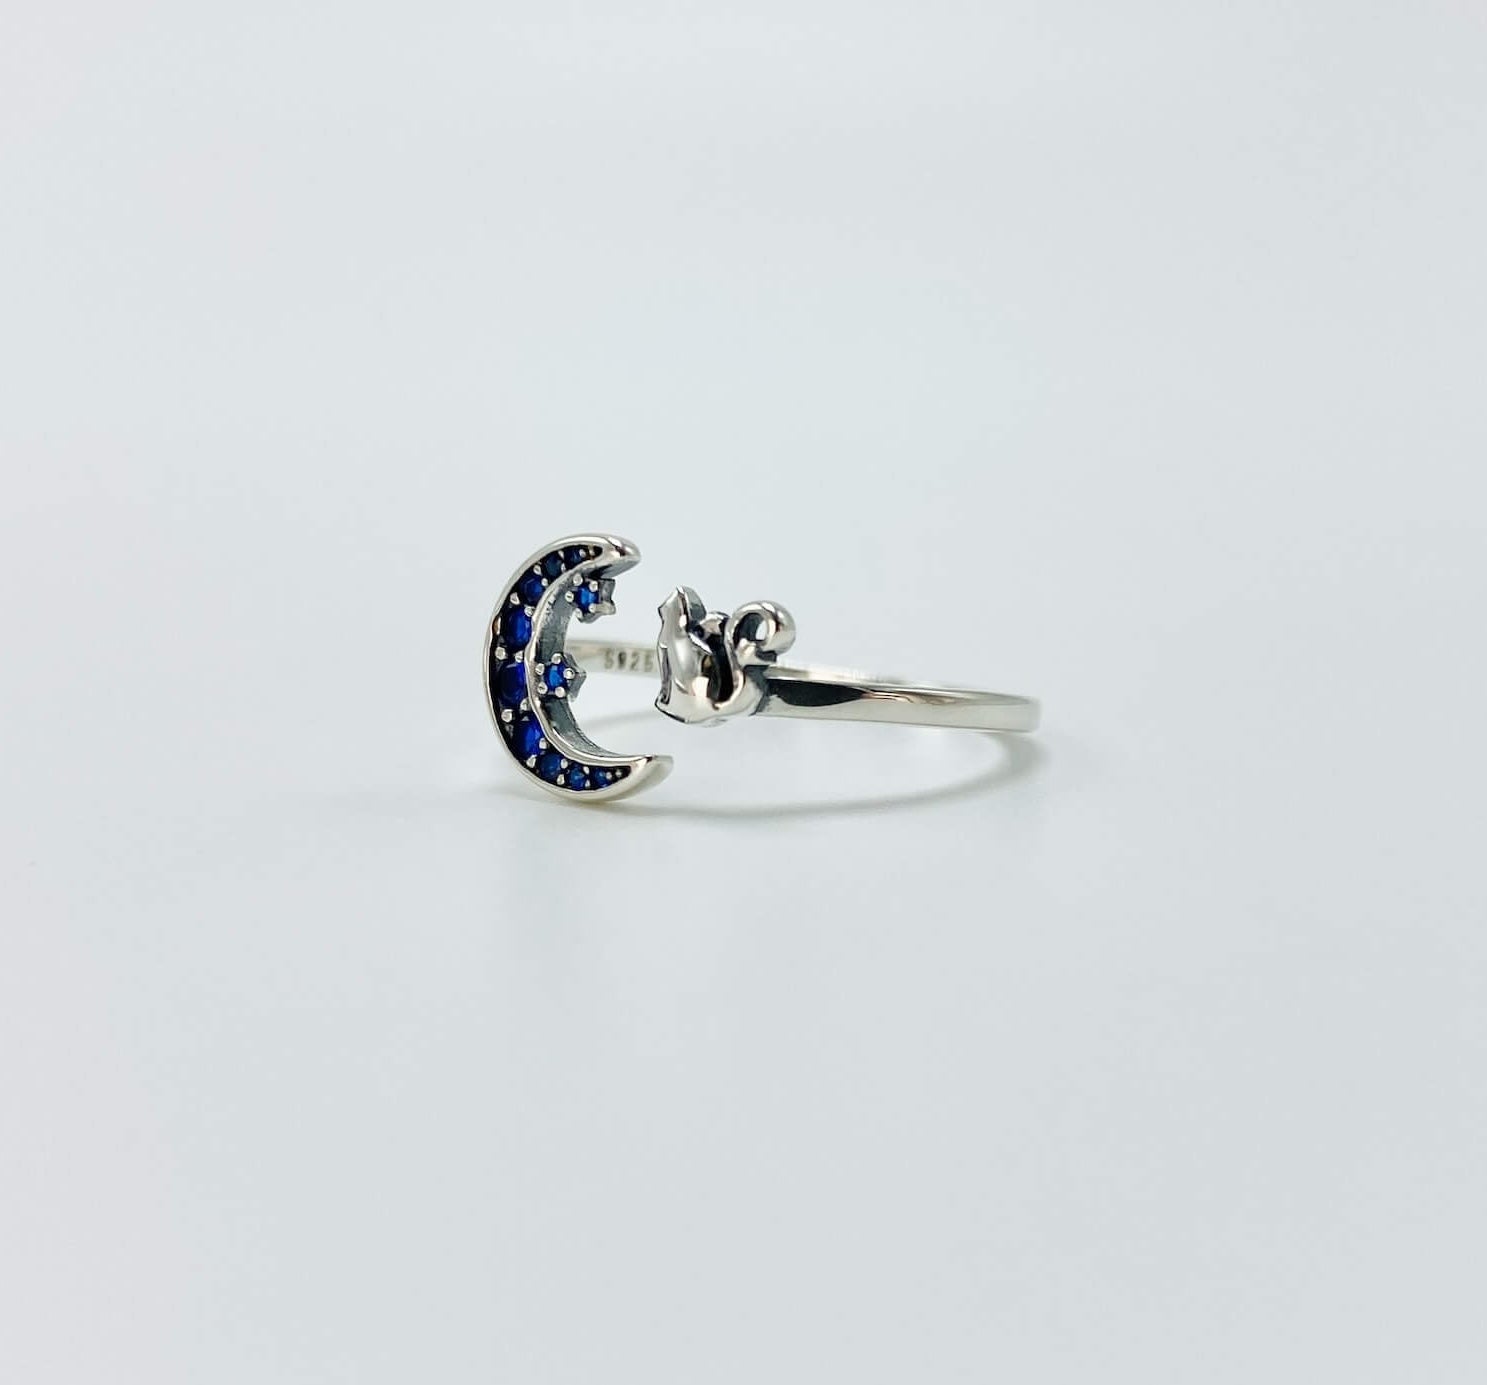 Sterling silver cat and moon ring with blue cubic zirconia gemstones in a pave setting.